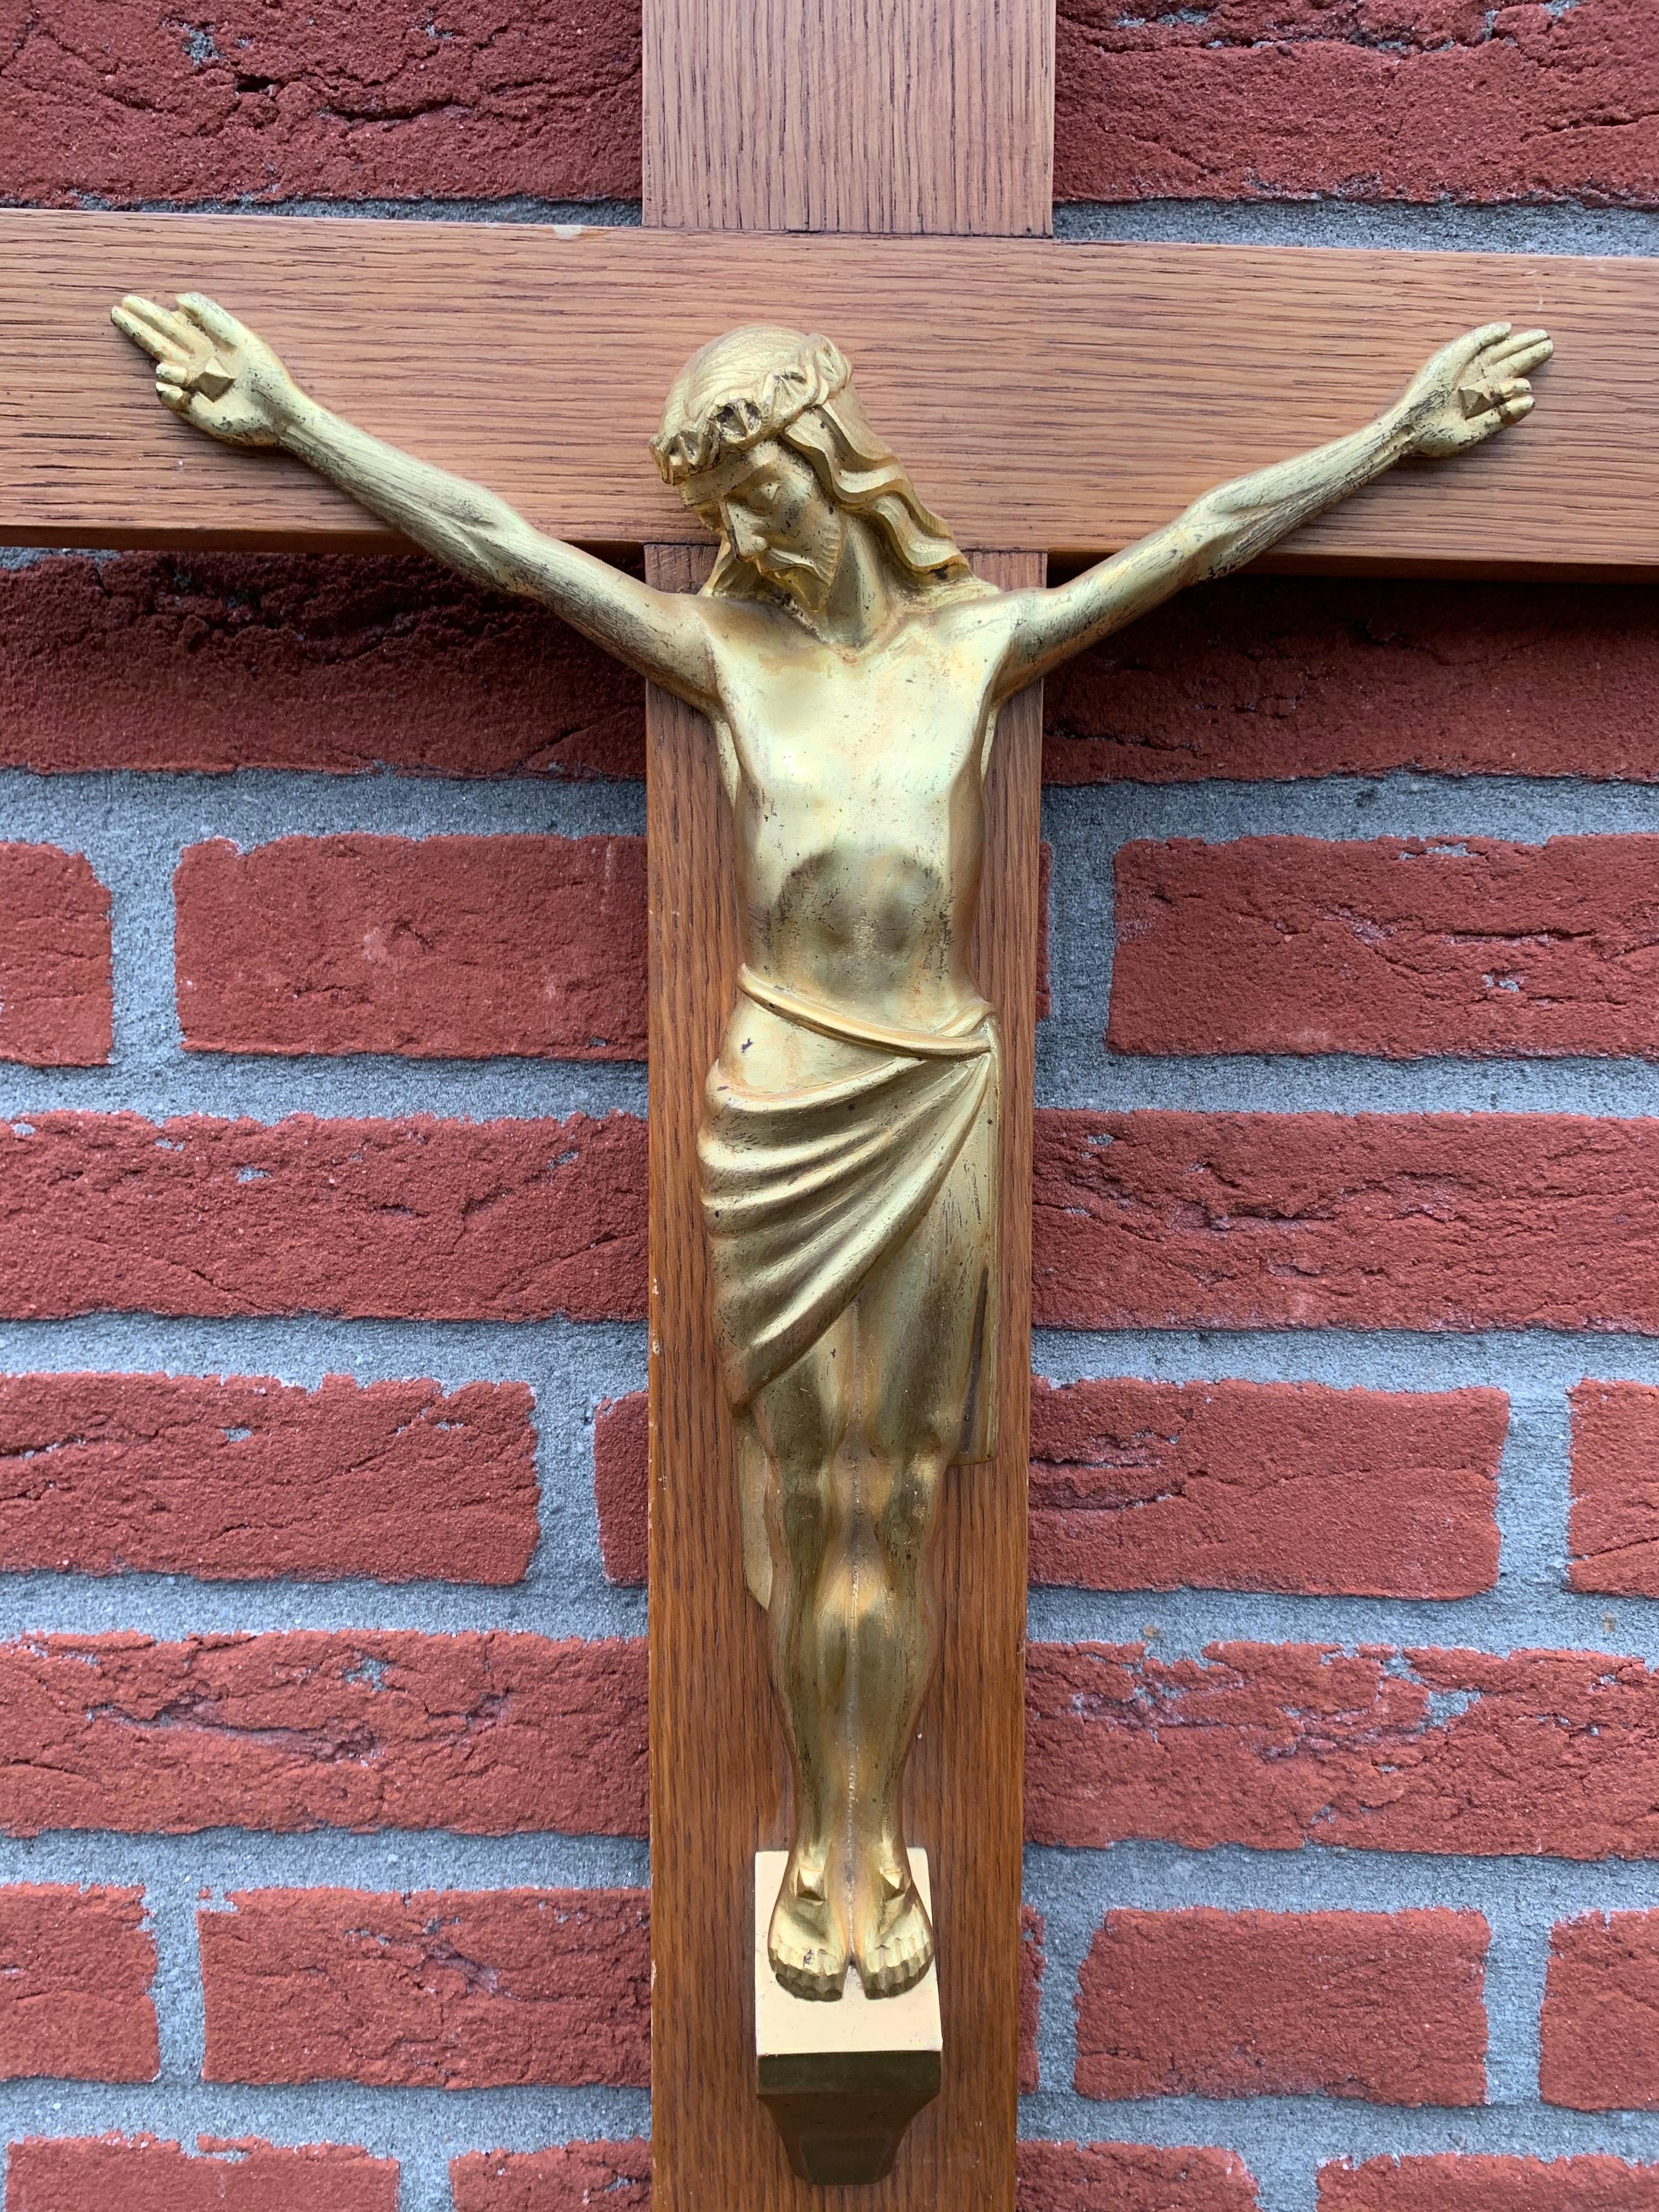 Rare and beautiful, fire gilt Art Deco era sculpture of Christ.

Some crucifixes come with sculptures of Christ in terrible agony, but the face underneath the crown of thorns on this Christ reflects nothing but piece and calm. Both alive and